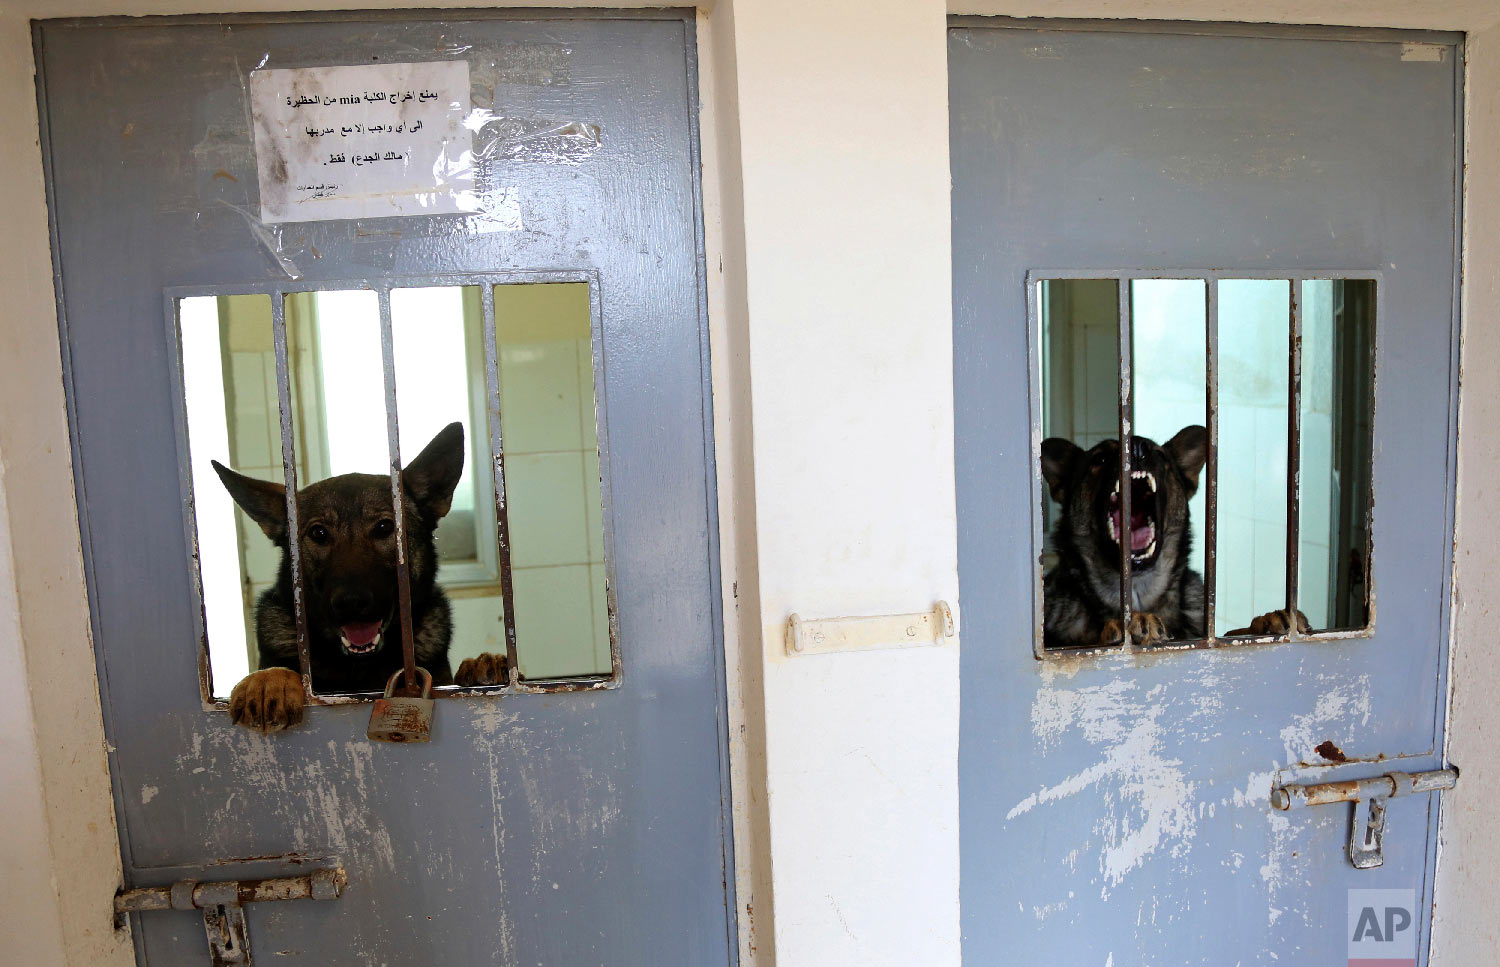  In this Monday, March 19, 2018 photo, two dogs from the K-9 unit of Jordan's police look through the bars of their kennels. The State Department's Anti-Terrorism Assistance program has trained 39 dog-handler teams and embedded two mentors with the p